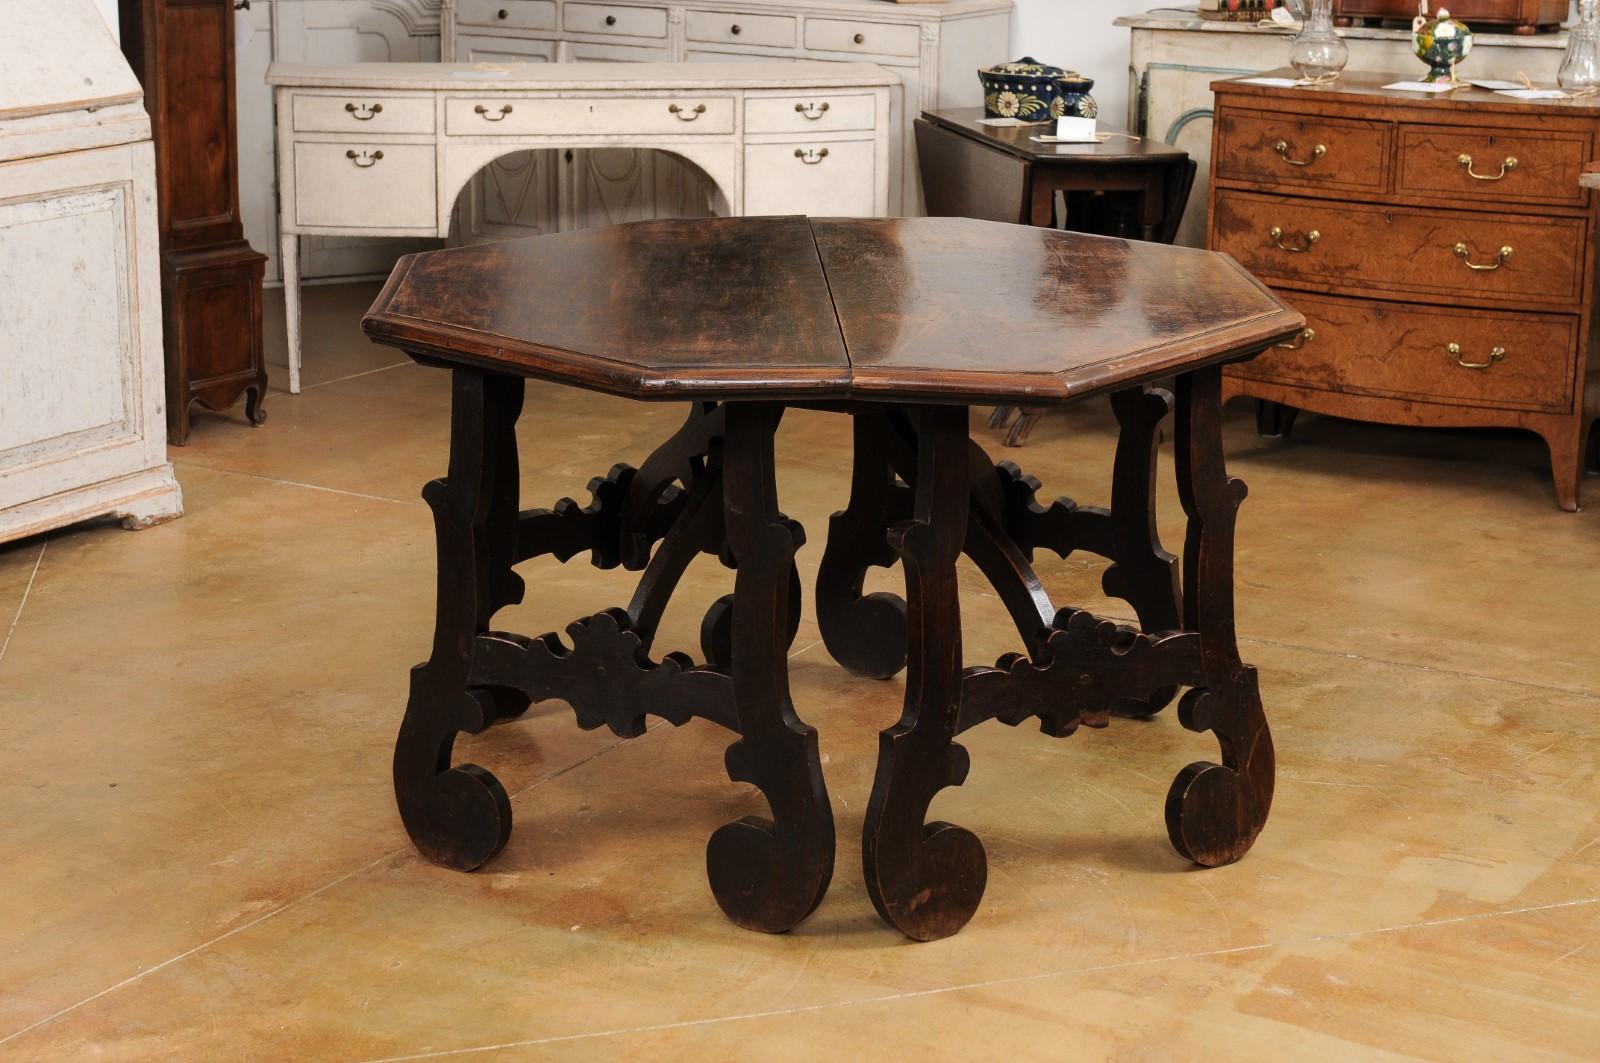 17th Century Italian Baroque Walnut Fratino Consoles with Carved Bases, a Pair For Sale 8